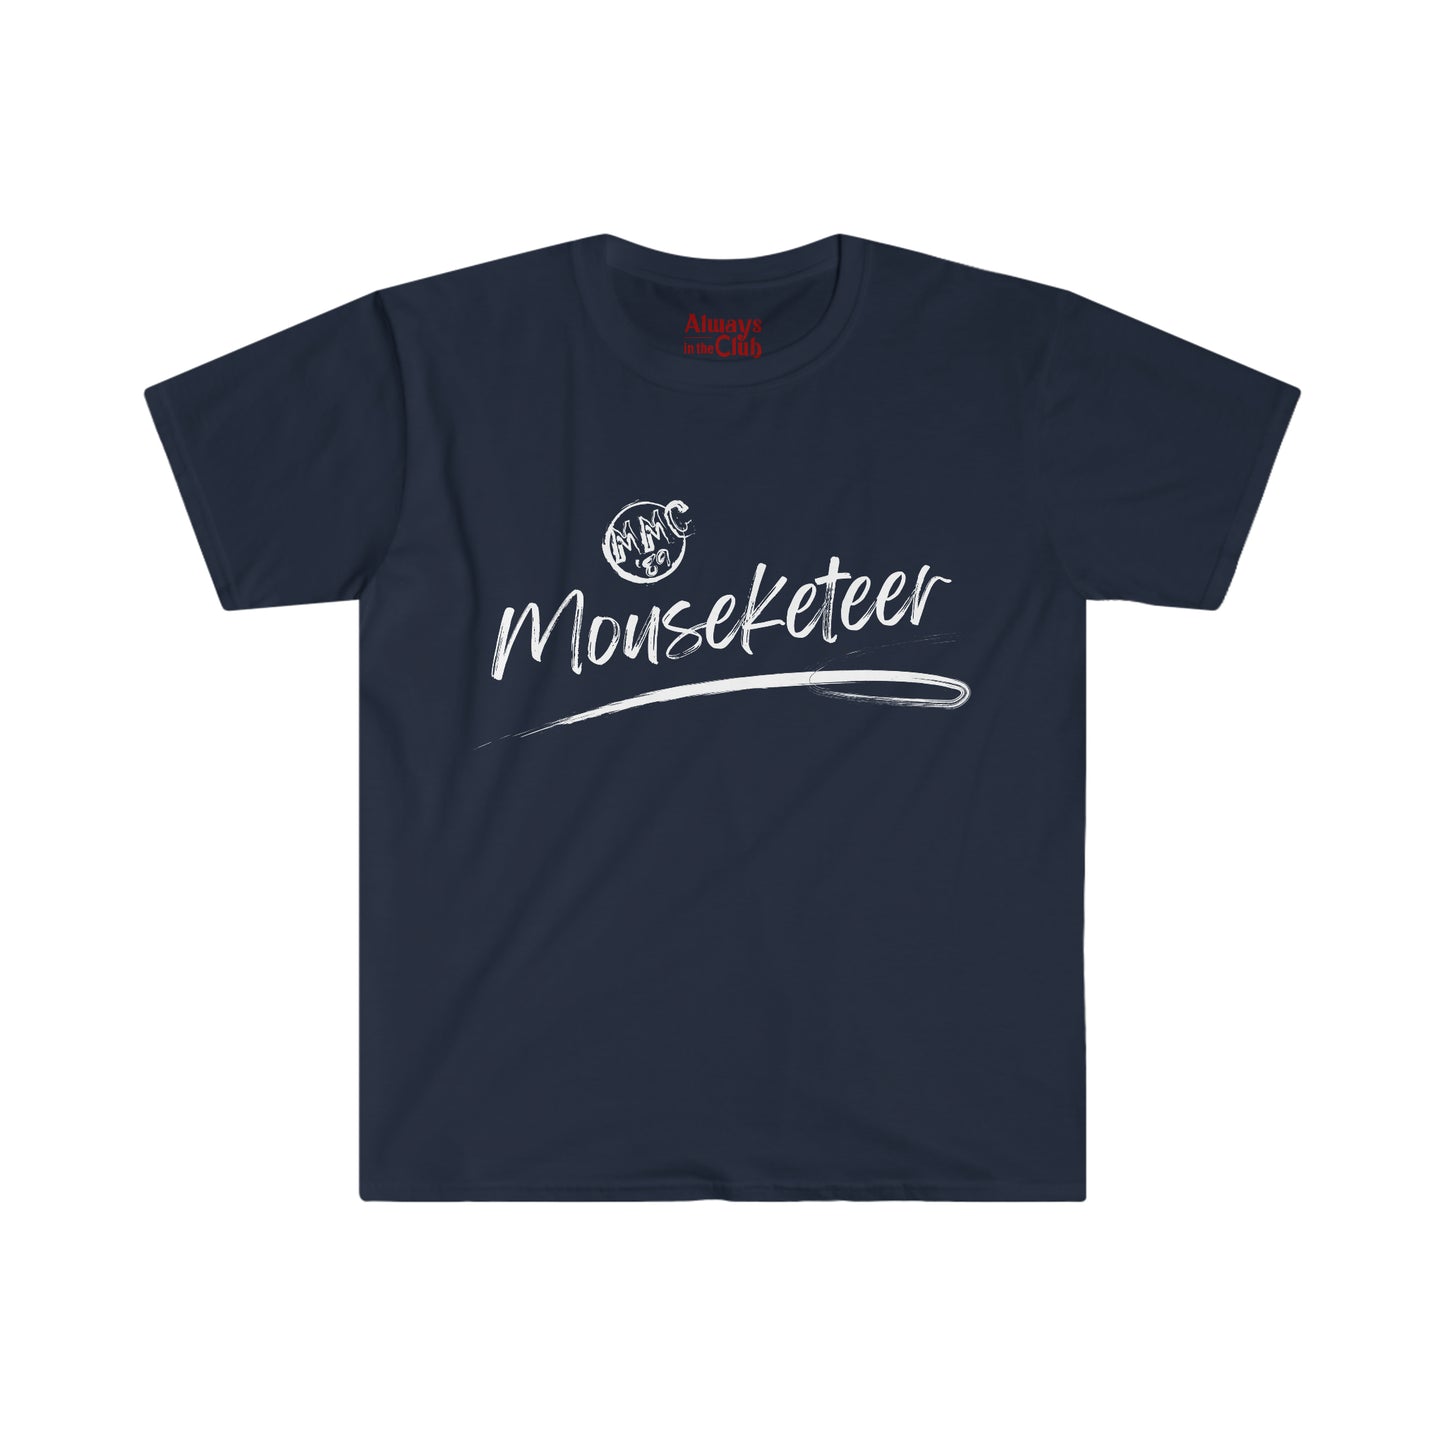 *CLUB MEMBER EXCLUSIVE - MMC'89 Mouseketeer Unisex Softstyle T-Shirt